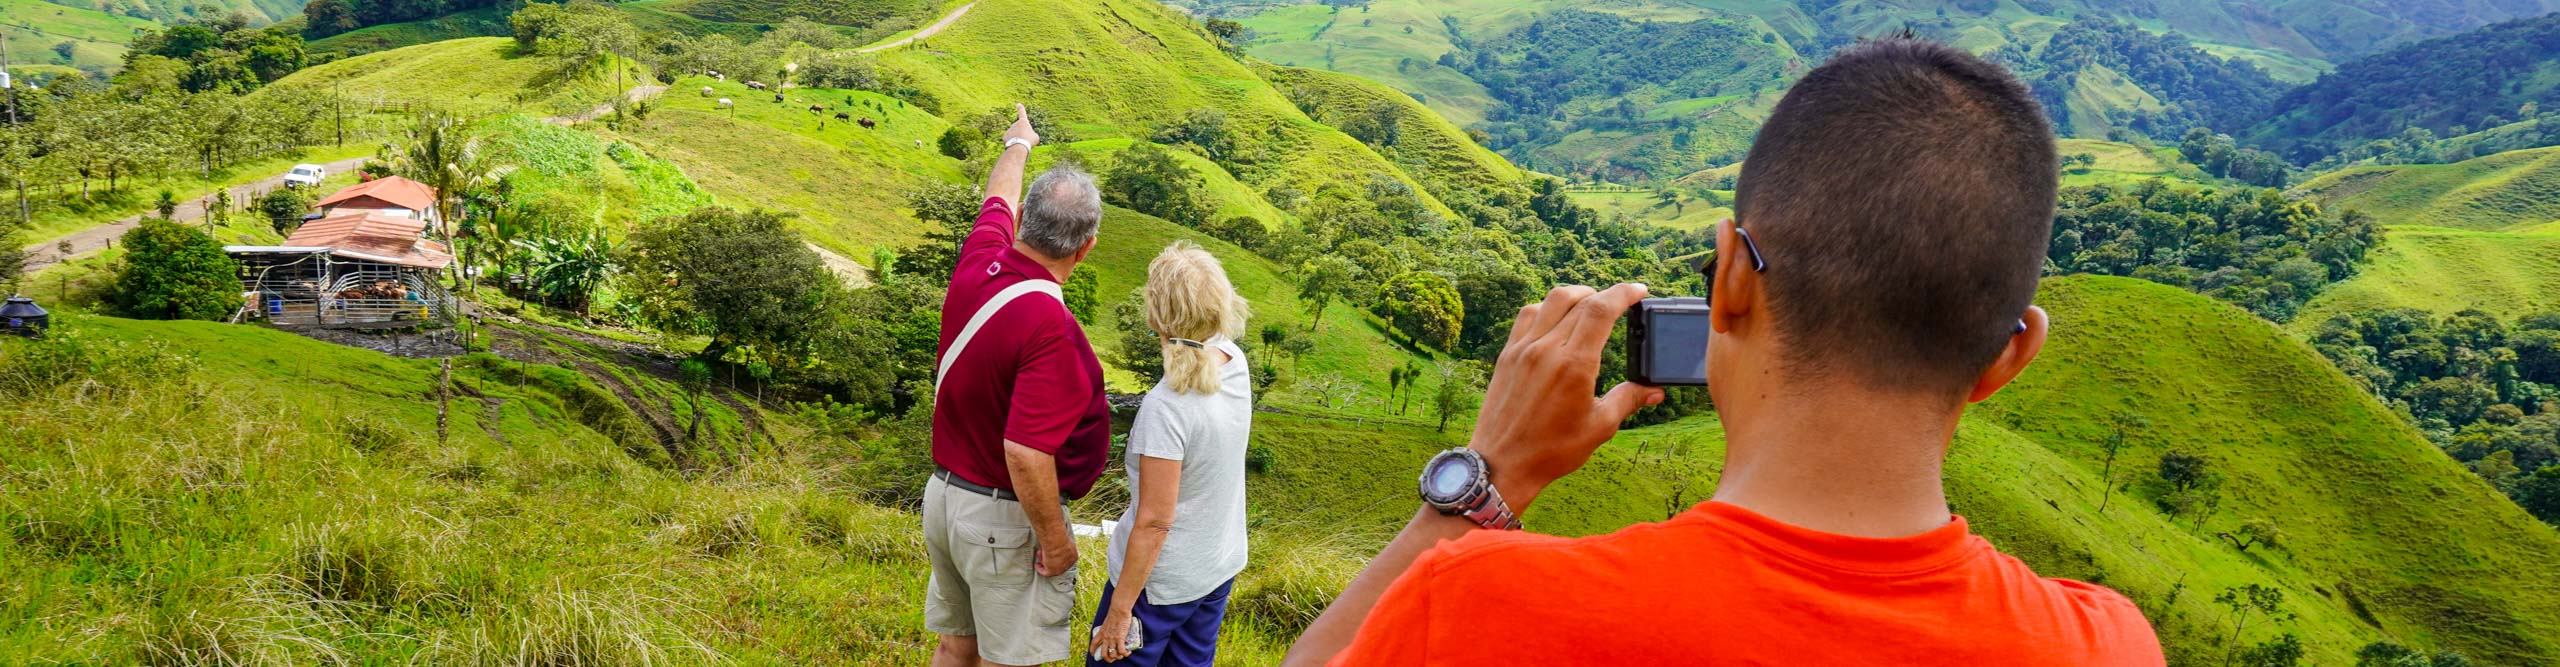 Couple looking out over hills with the guide taking their picture,  Costa Rica 